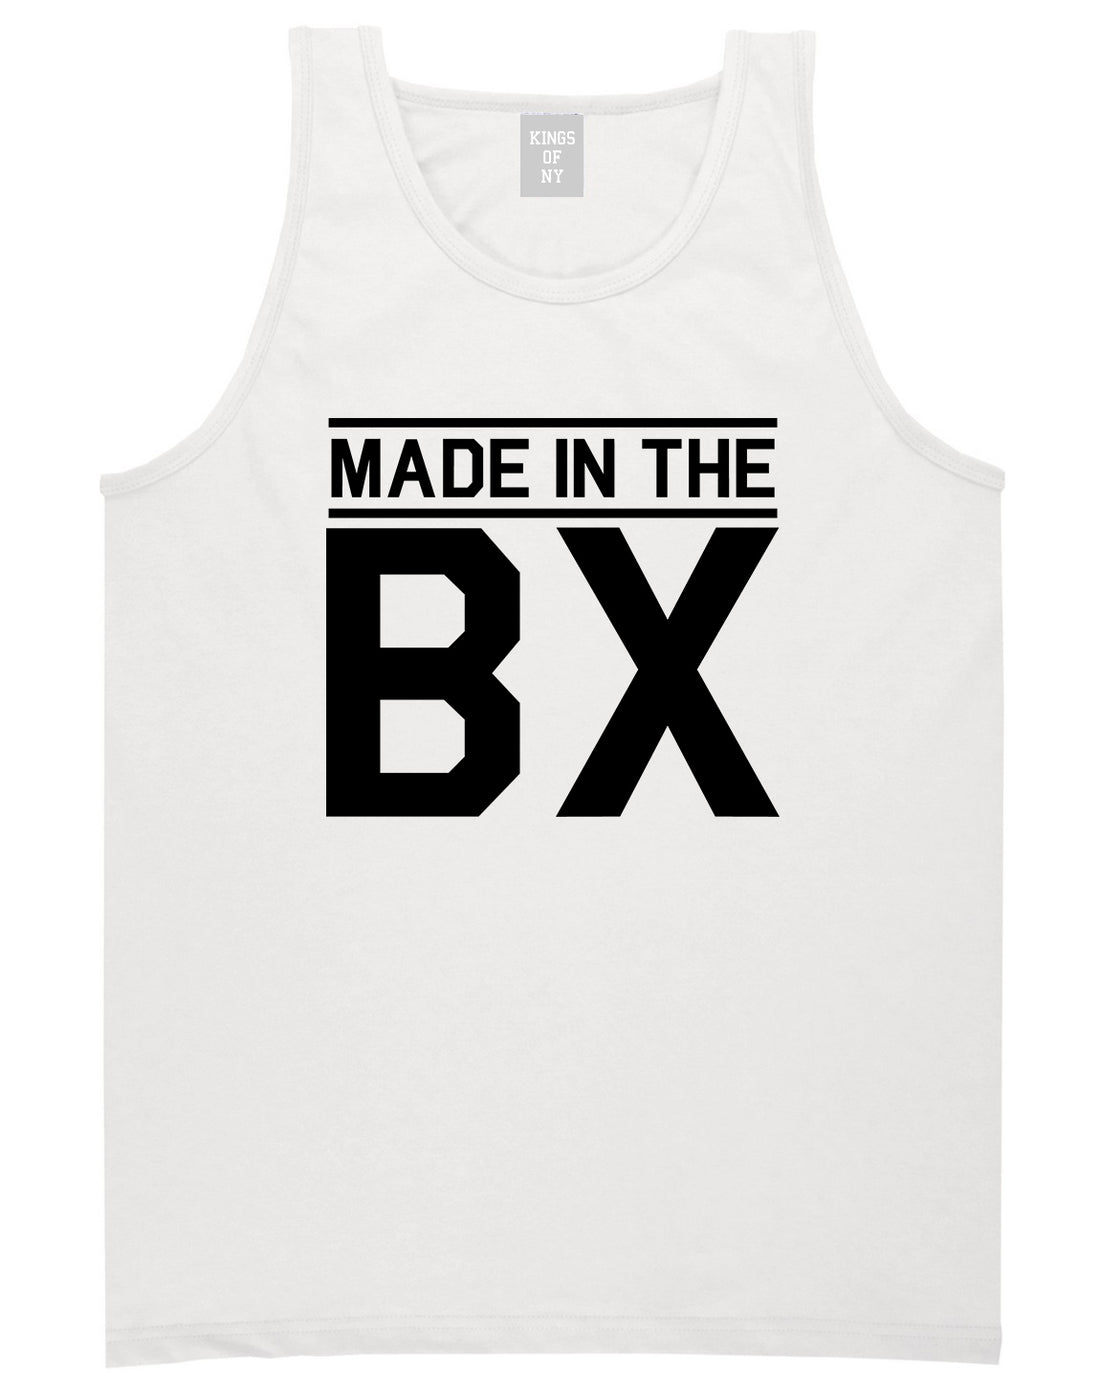 Made In The BX Bronx Mens Tank Top T-Shirt White